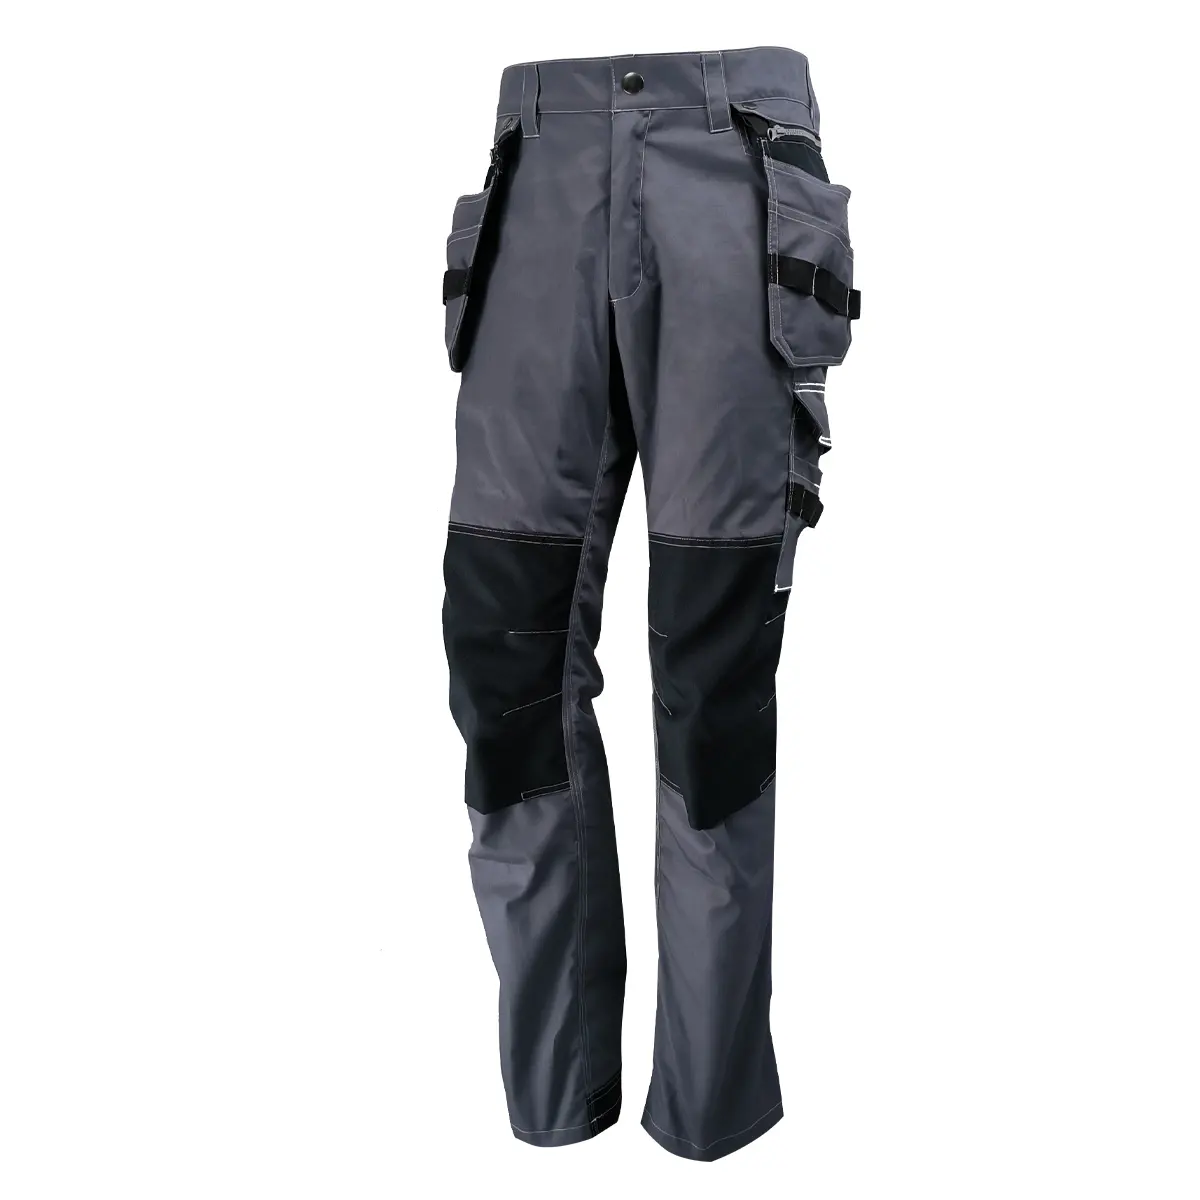 Wholesale 65/35TC work trousers six pocket work clothes knee pads work pants for men